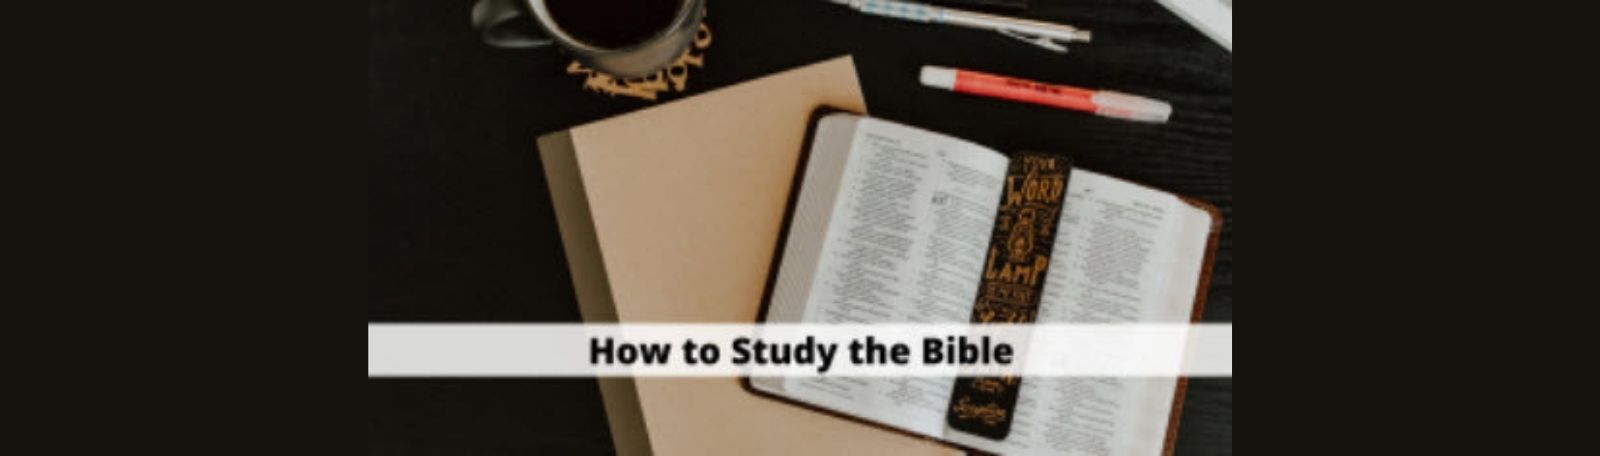 Featured image for “How To Study The Bible”